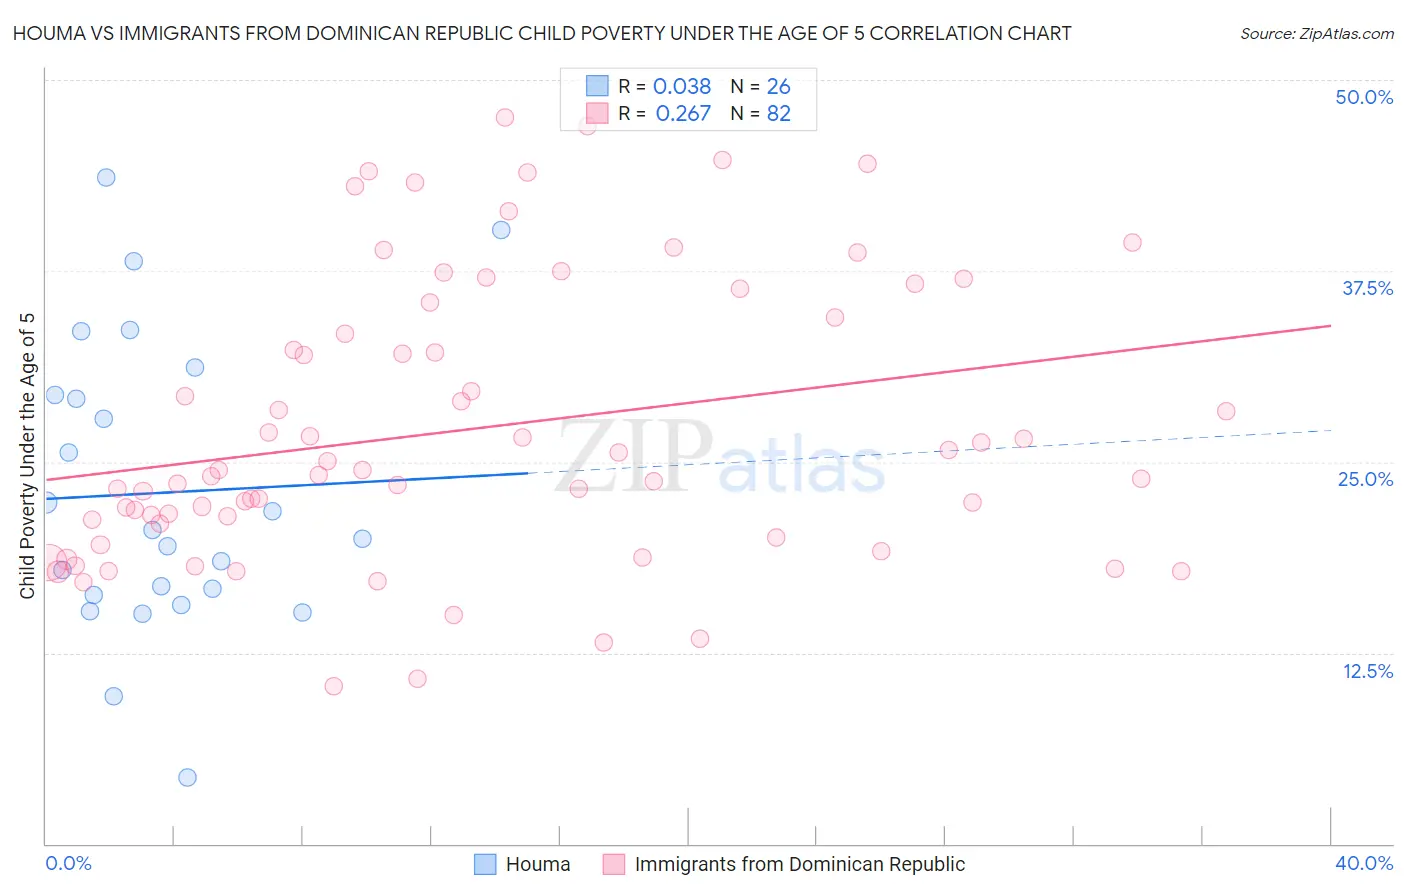 Houma vs Immigrants from Dominican Republic Child Poverty Under the Age of 5